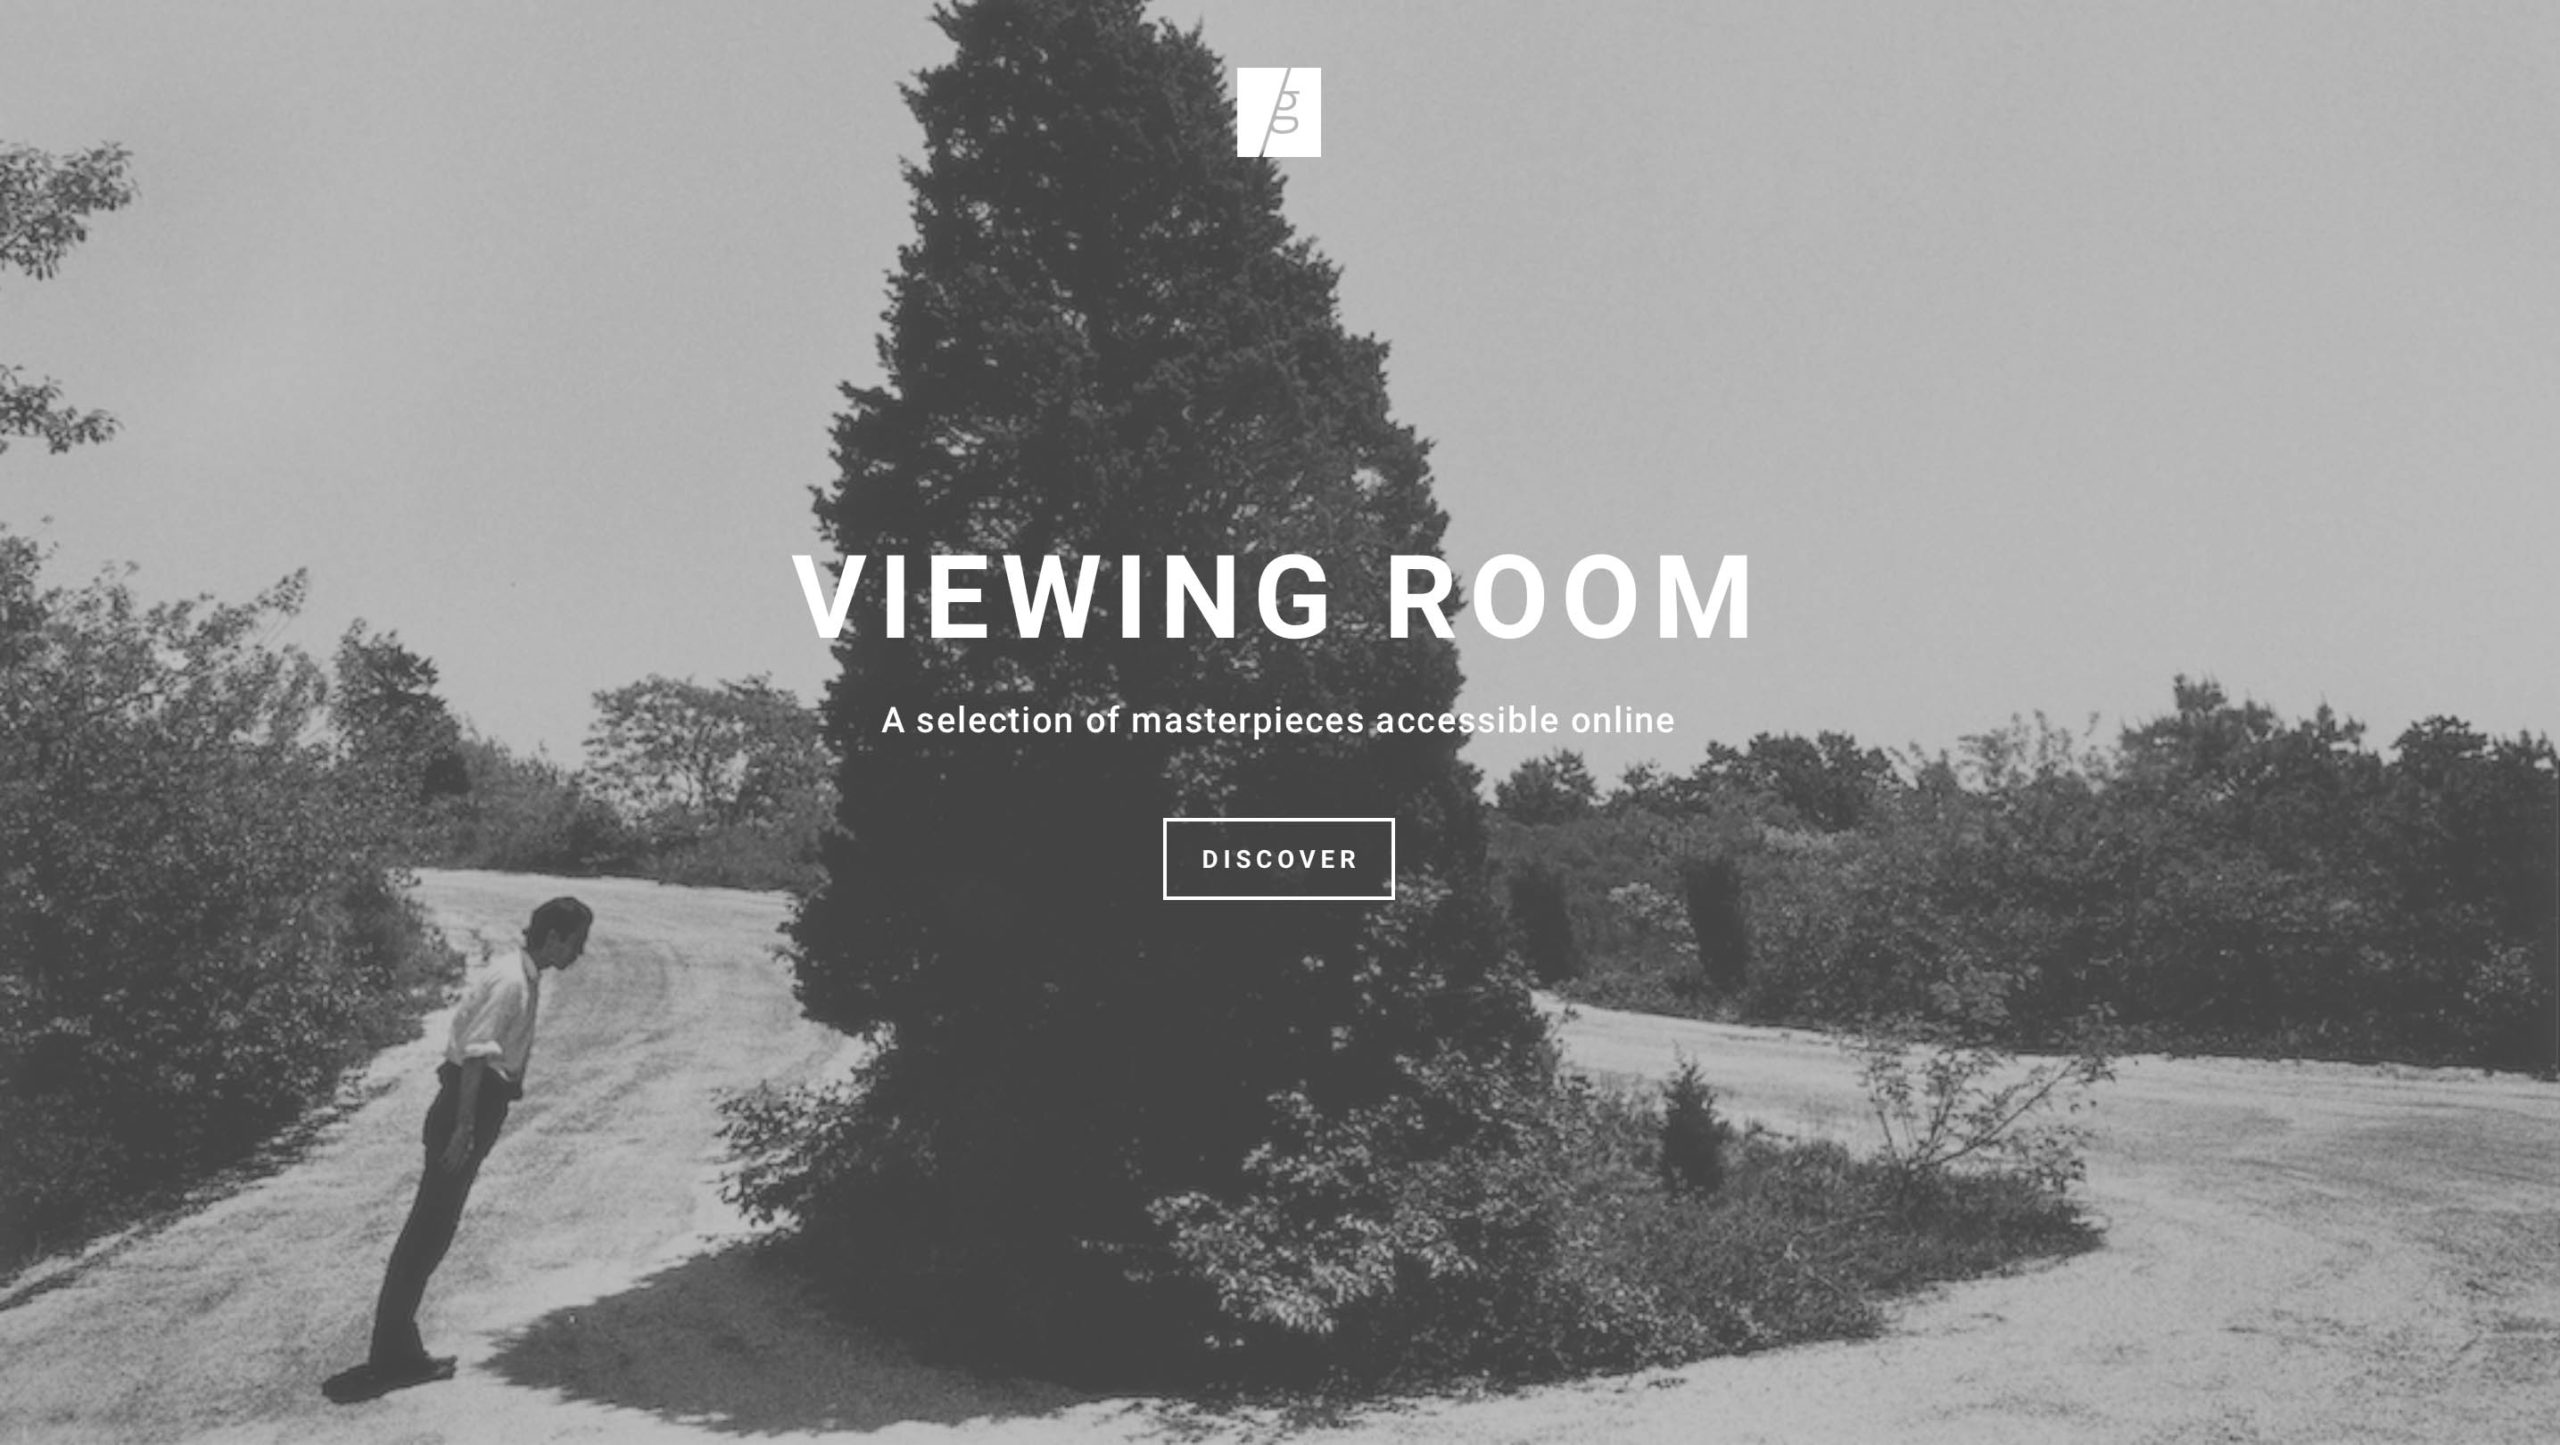 Galerie Thierry Bigaignon: Viewing Rooms